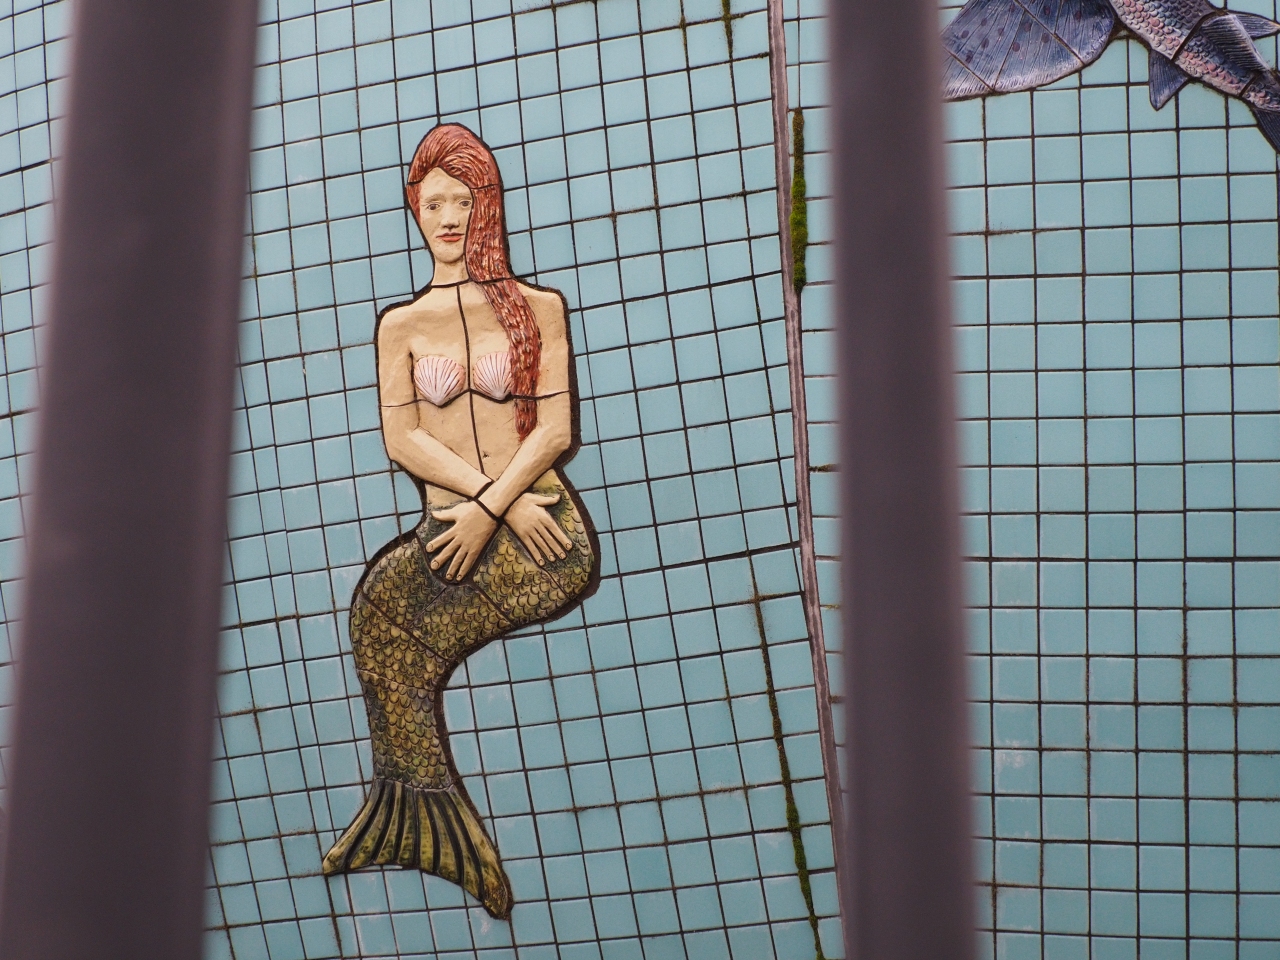 Detail: I can't be the only one bewitched by this mermaid's beauty